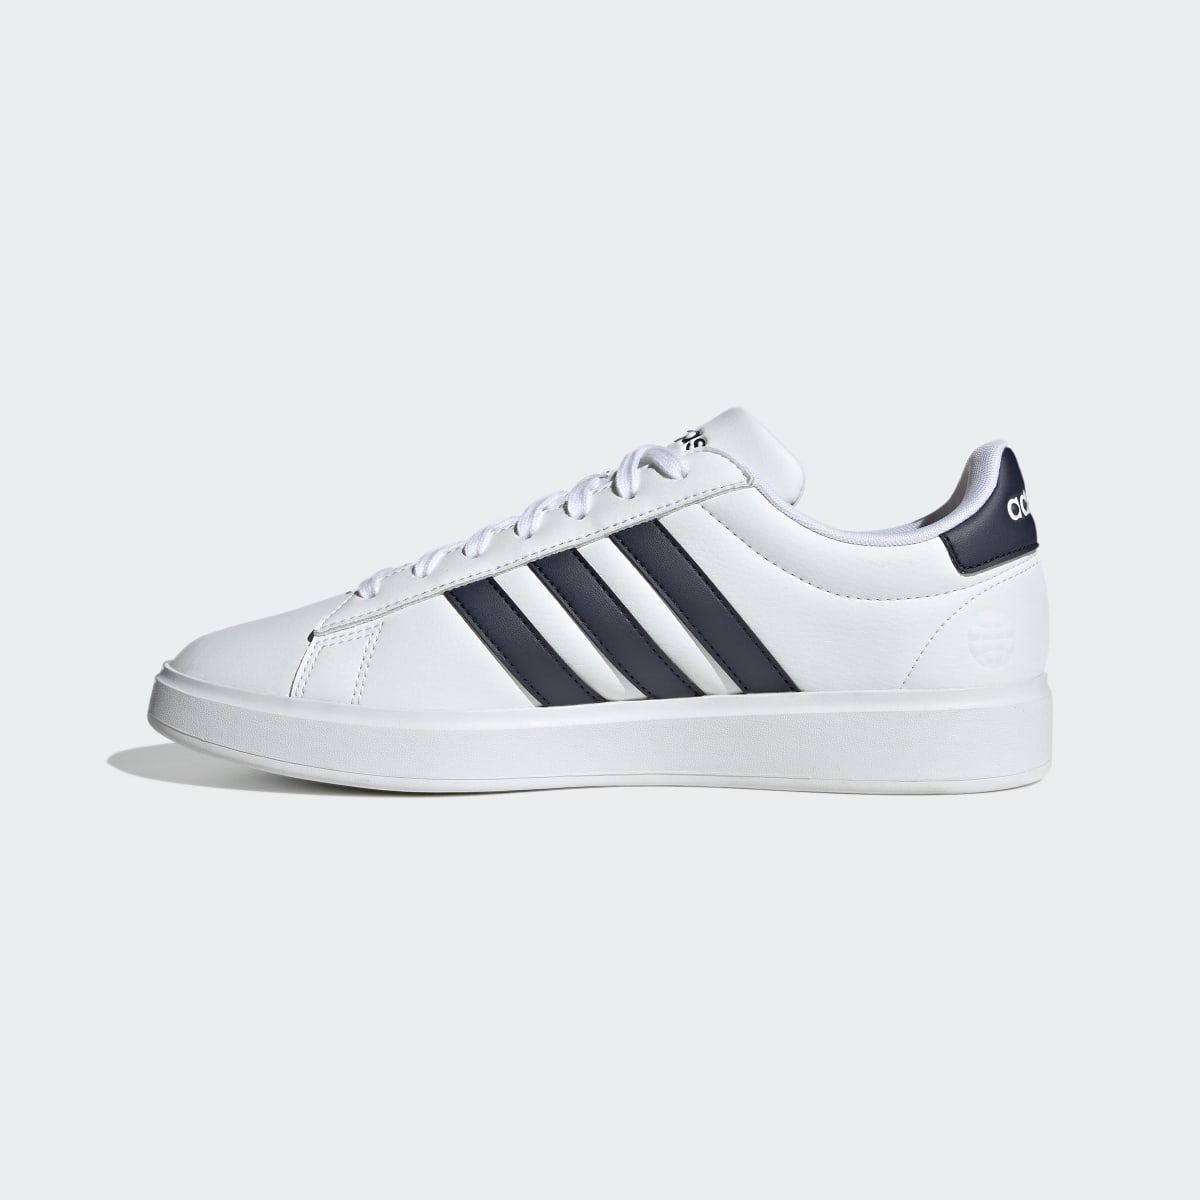 Adidas Grand Court Shoes. 7